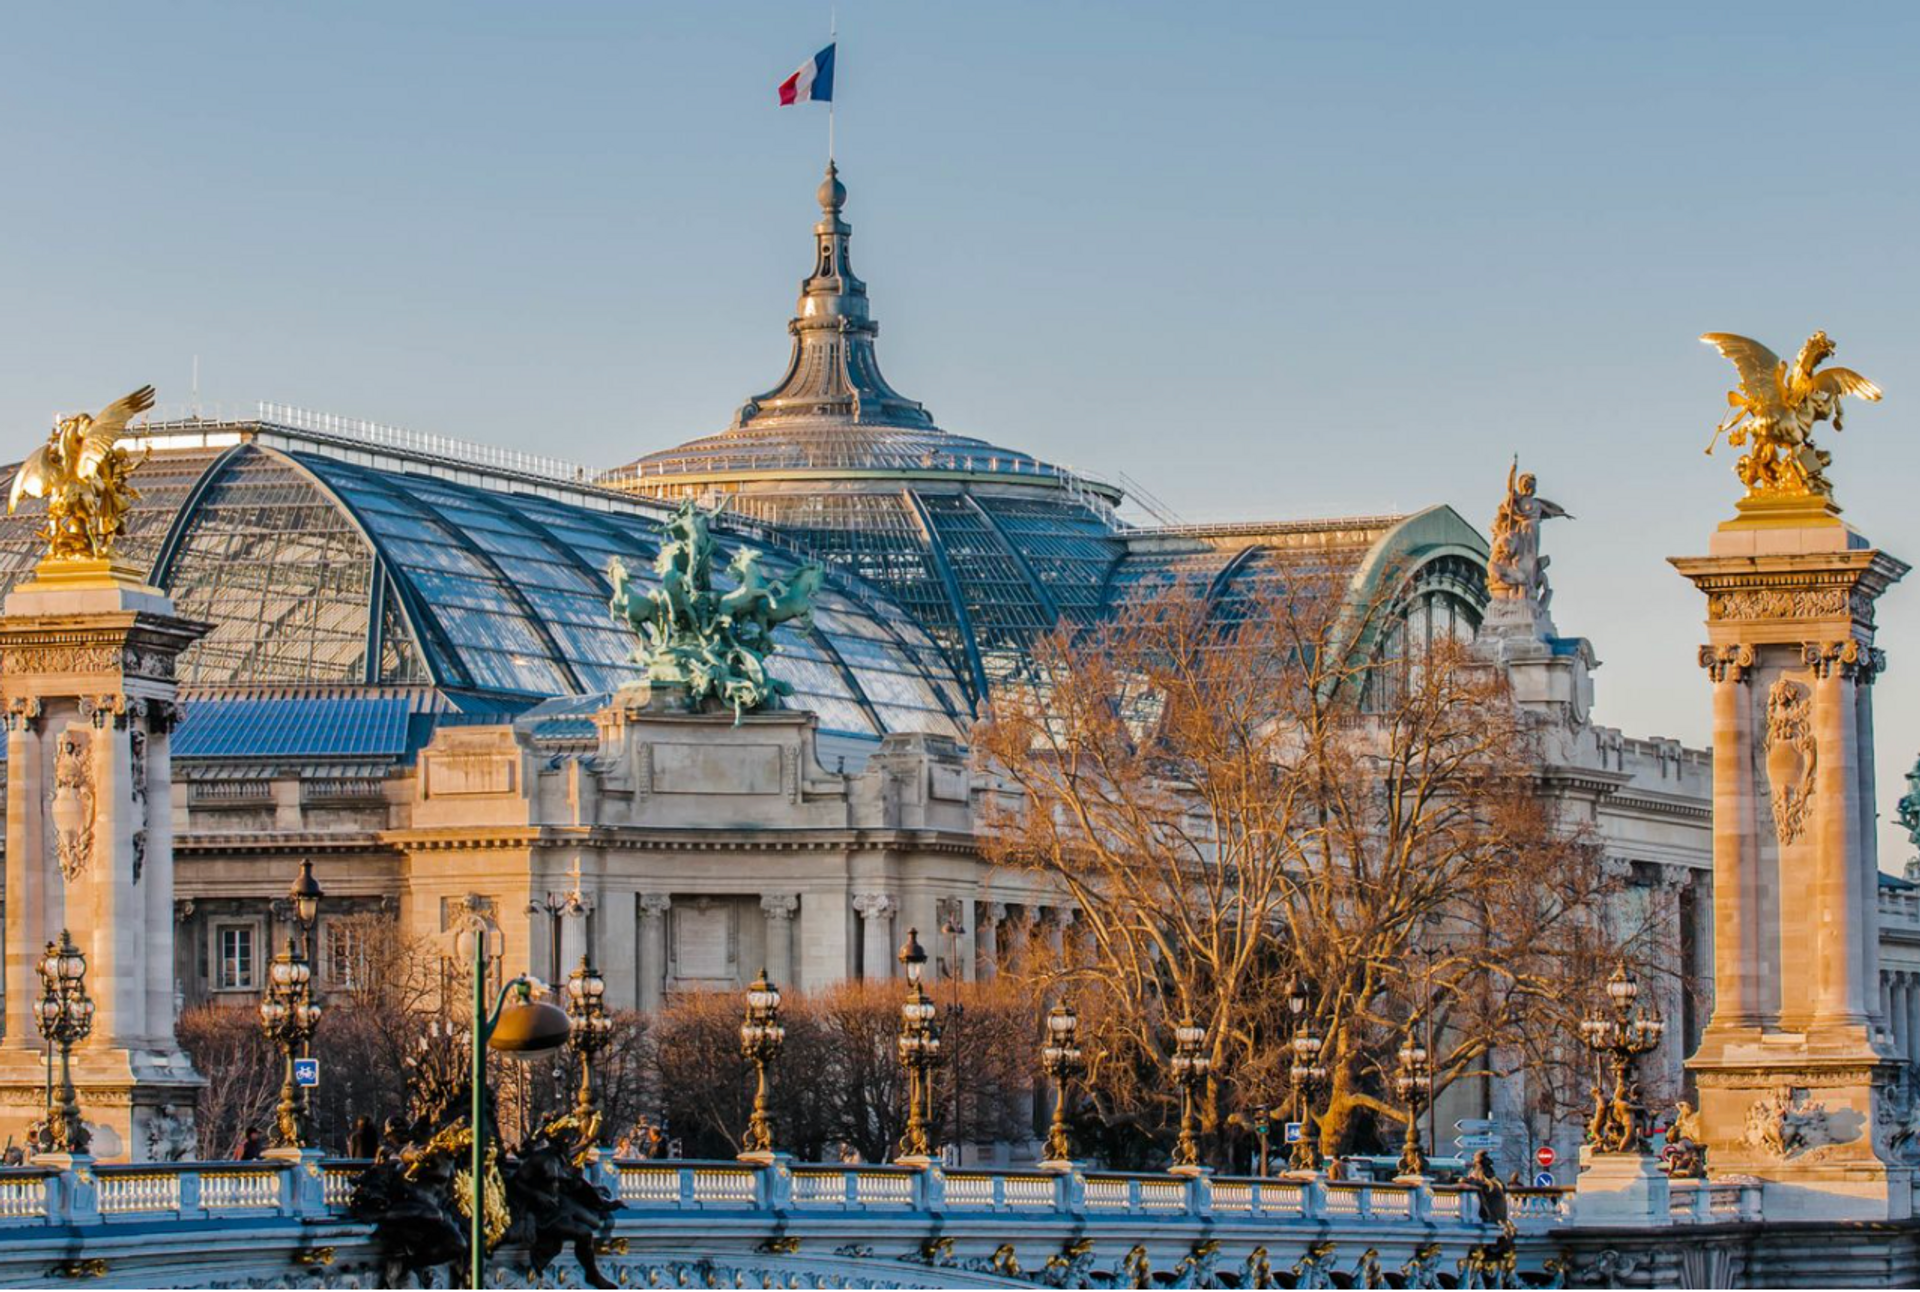 Art Basel's Paris fair will take place in the Grand Palais from 2024 following renovations. Photo: Shutterstock